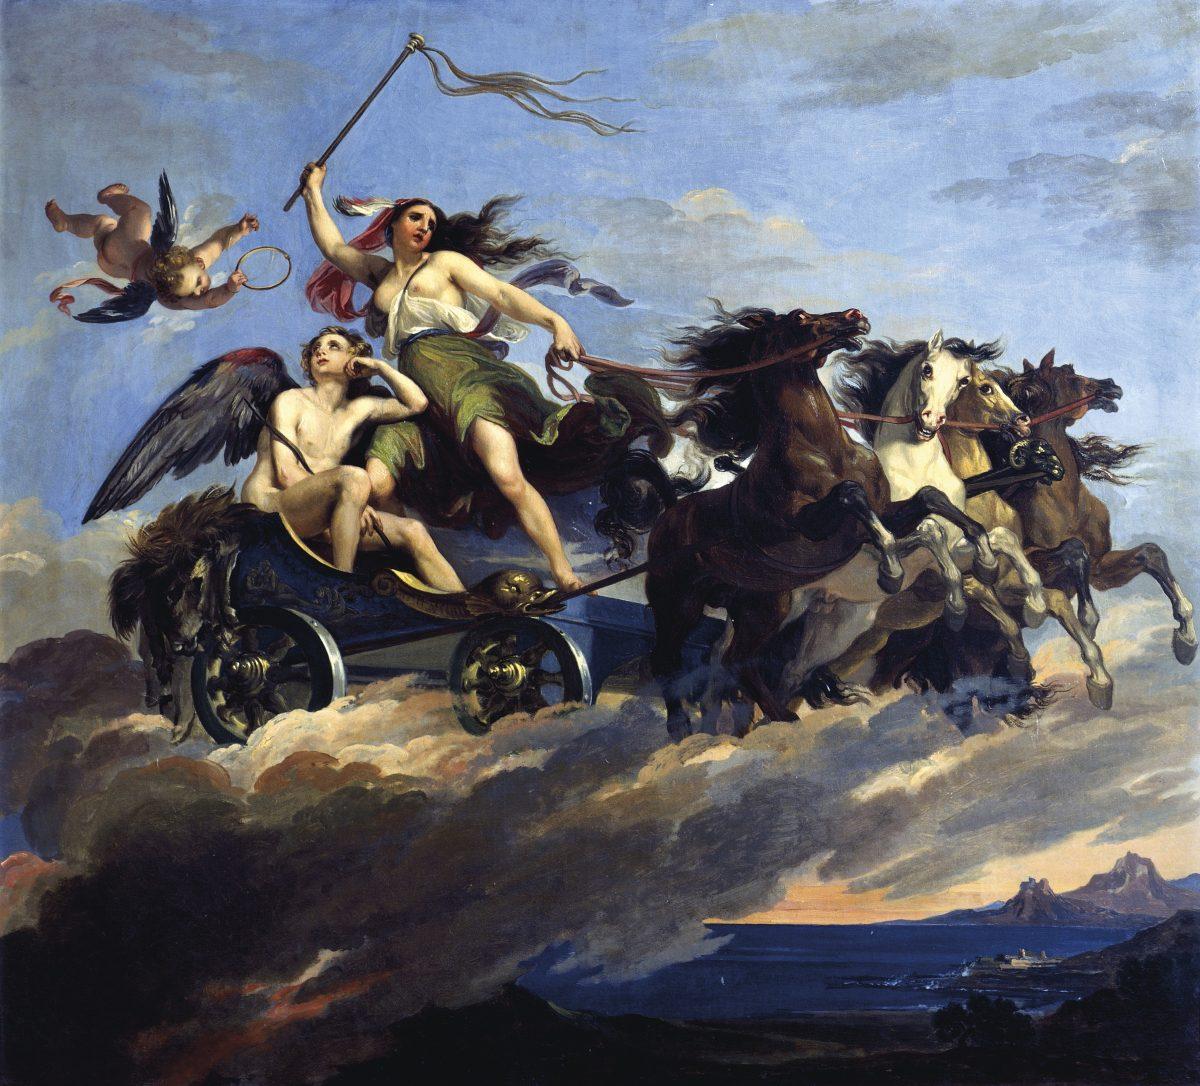 "<span class="s1">Folly Driving the Chariot of Love</span>" by Giuseppe Bezzuoli. Oil painting. Gallerie degli Uffizi - Galleria d'Arte Moderna, Palazzo Pitti, in Florence, Italy. (DeAgostini Picture Library/Bardazzi/Bridgeman Images, Christie's)